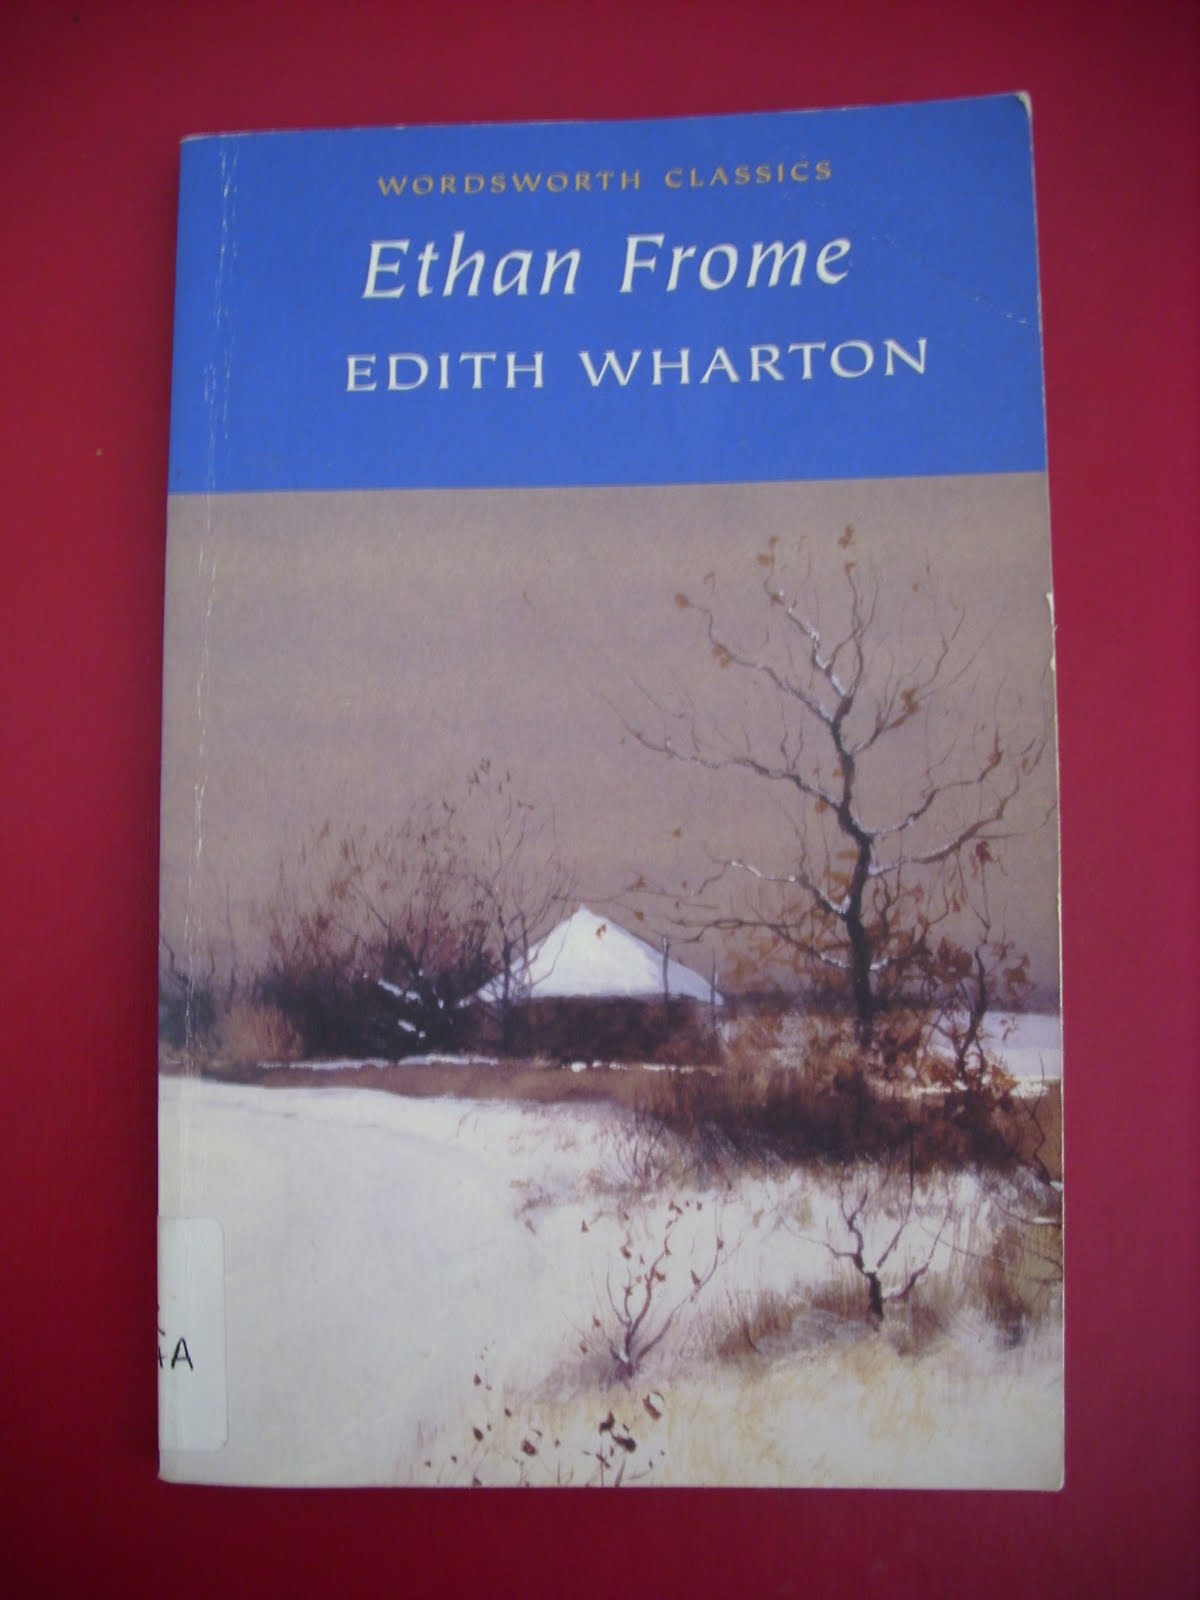 Ethan Frome Critical Essays